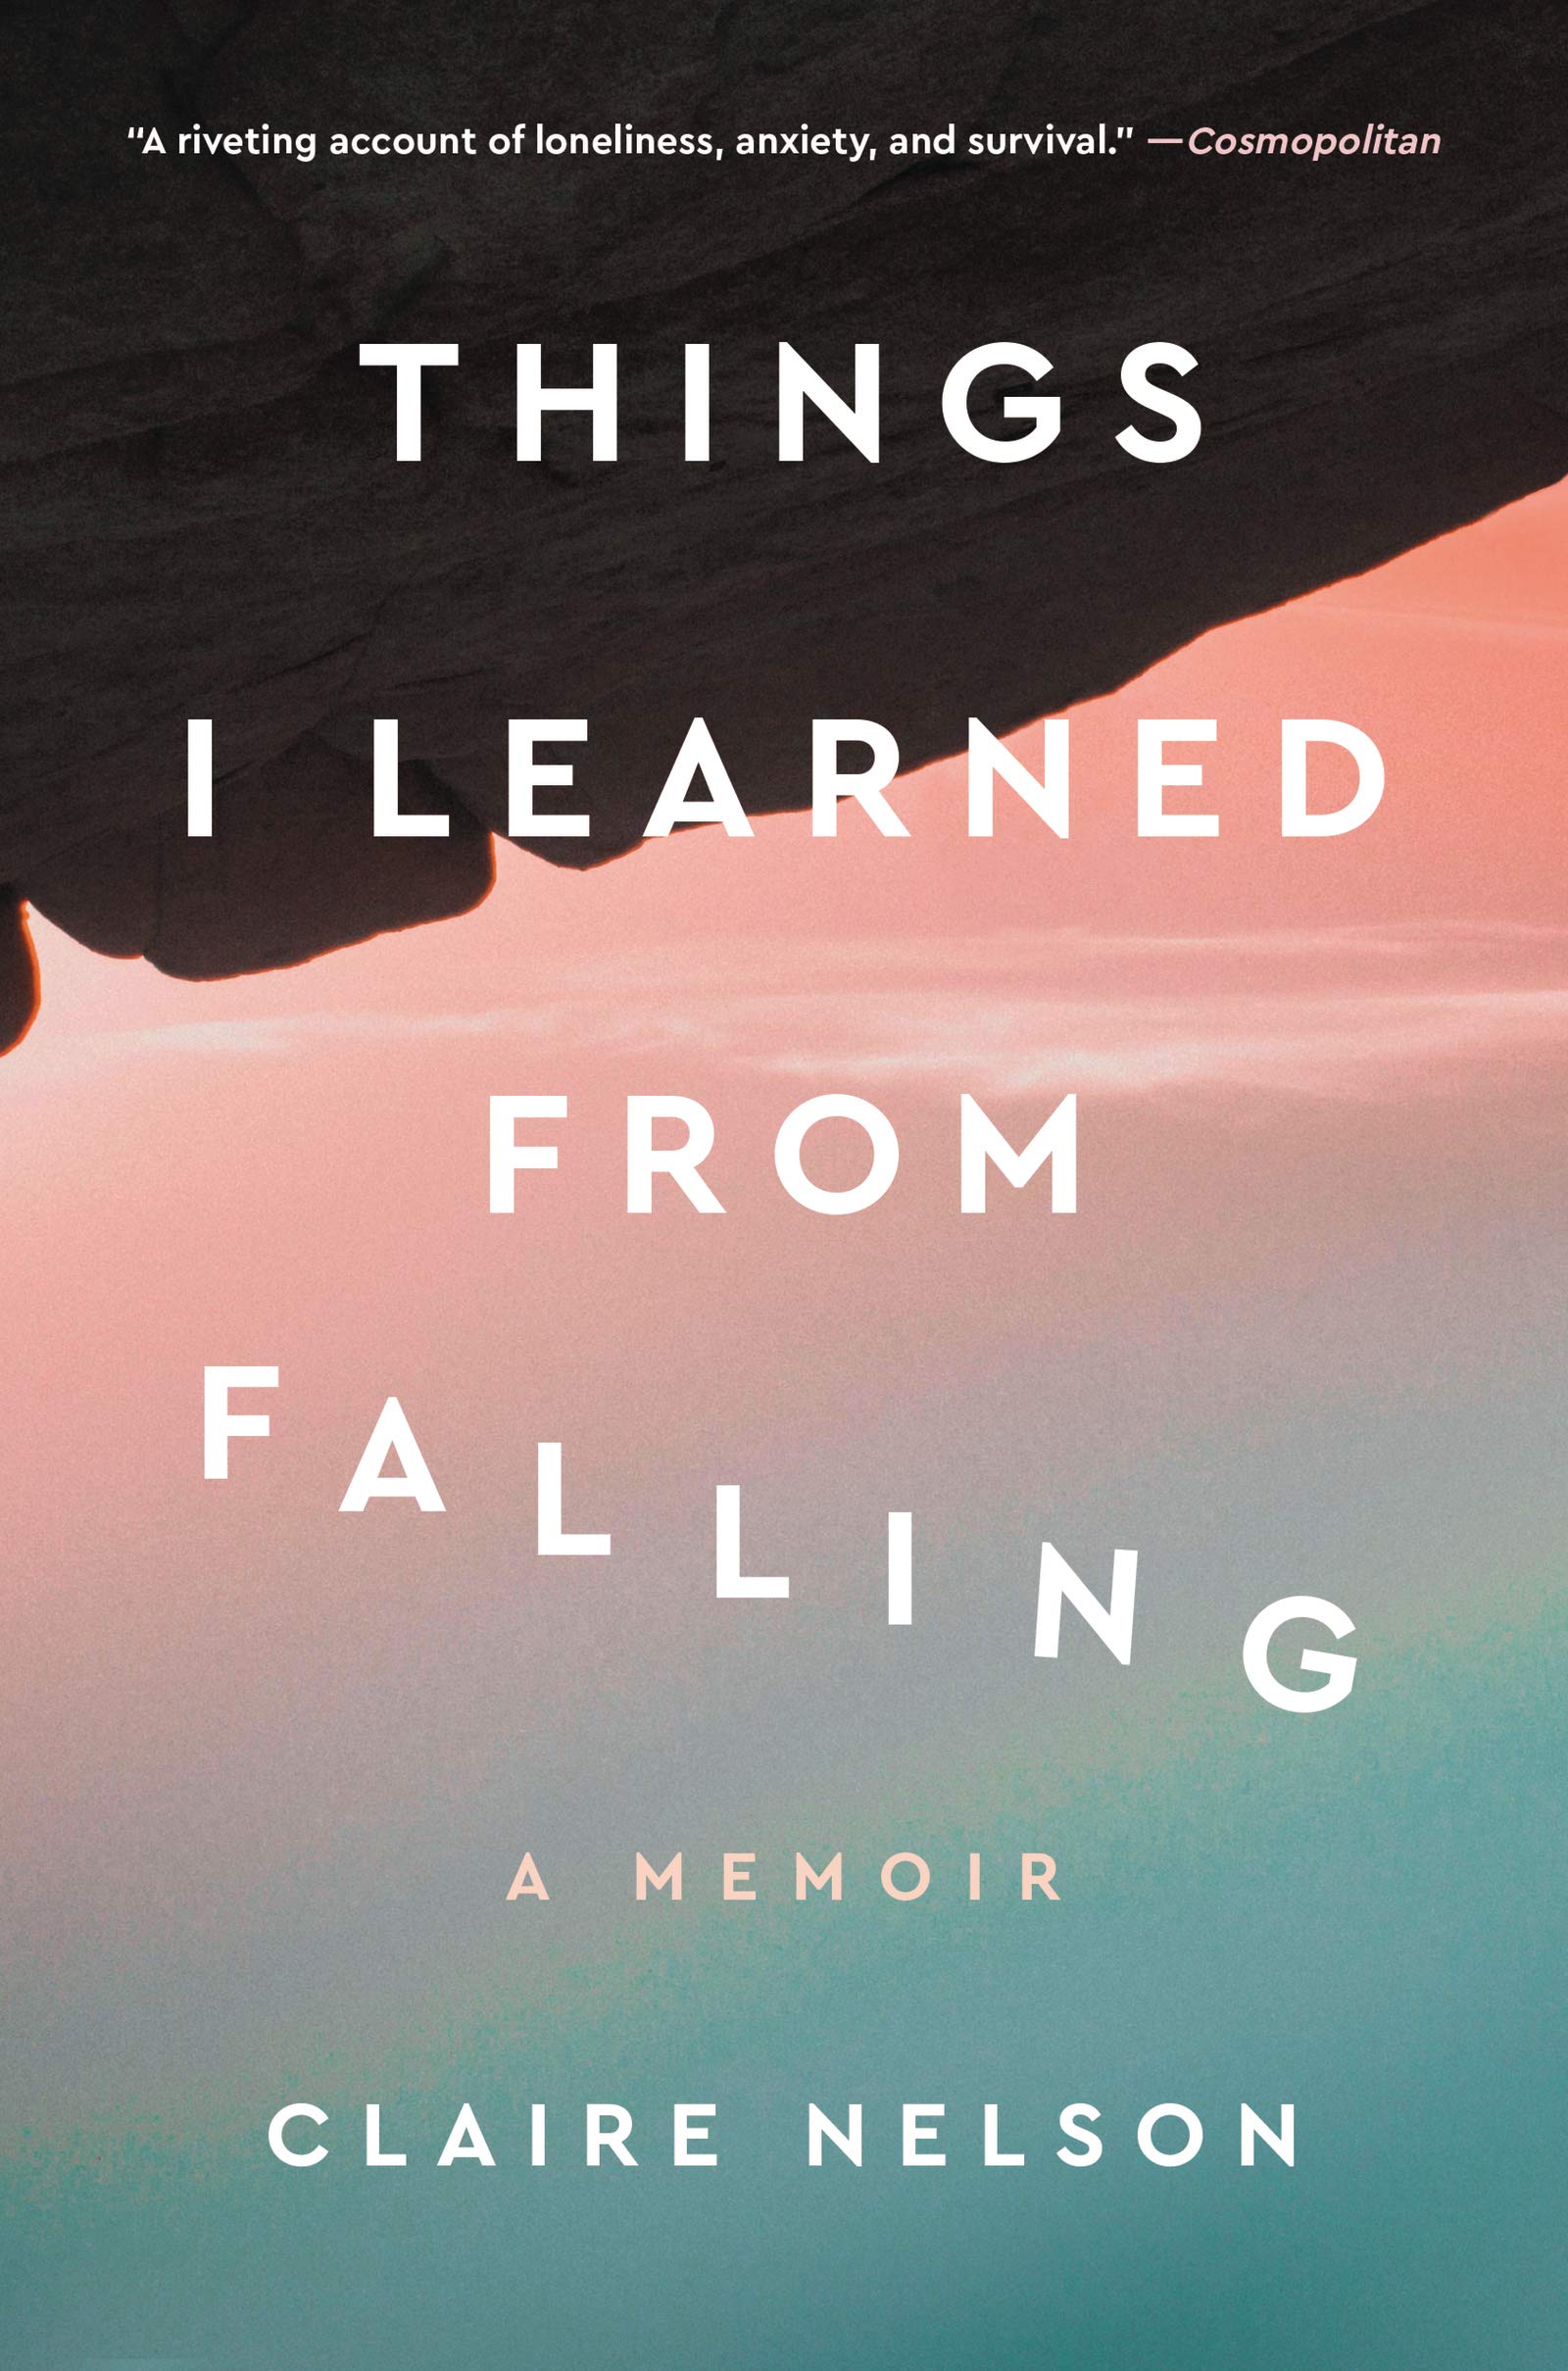 Image for "Things I Learned From Falling"